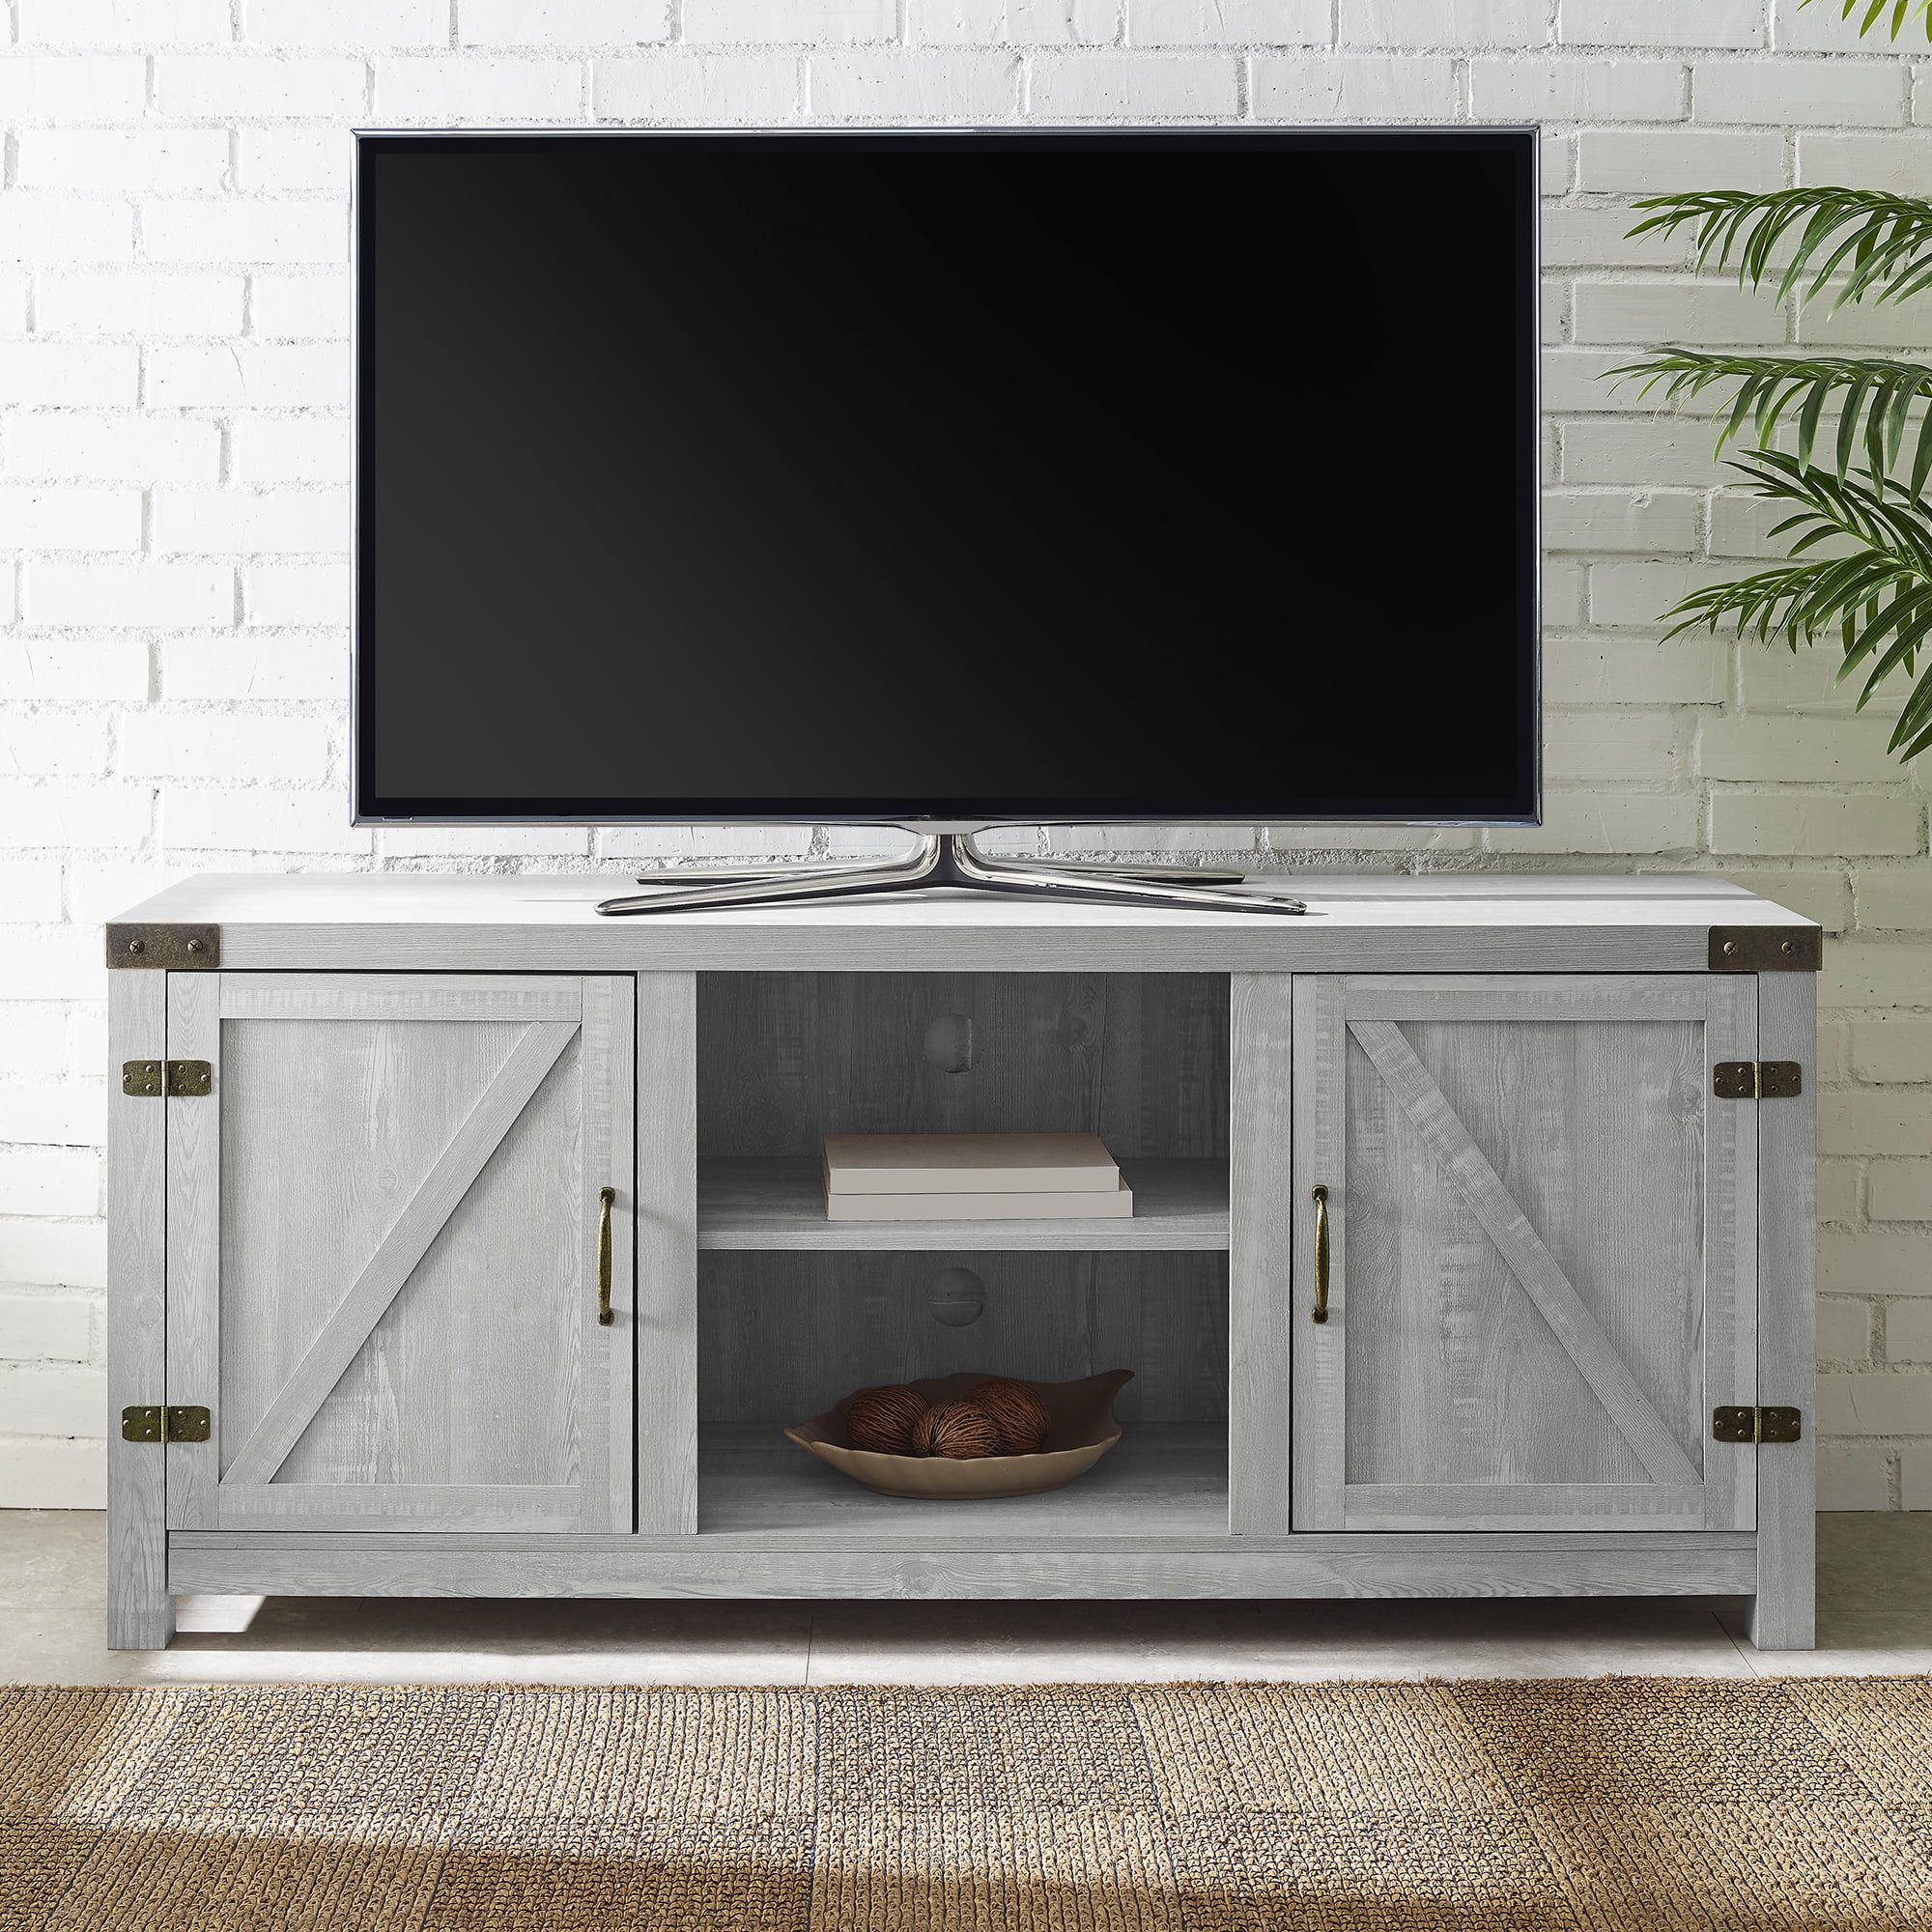 Woven Paths Modern Farmhouse Barn Door Tv Stand For Tvs Up To 65 Throughout Preferred Modern Farmhouse Rustic Tv Stands (Photo 7 of 15)